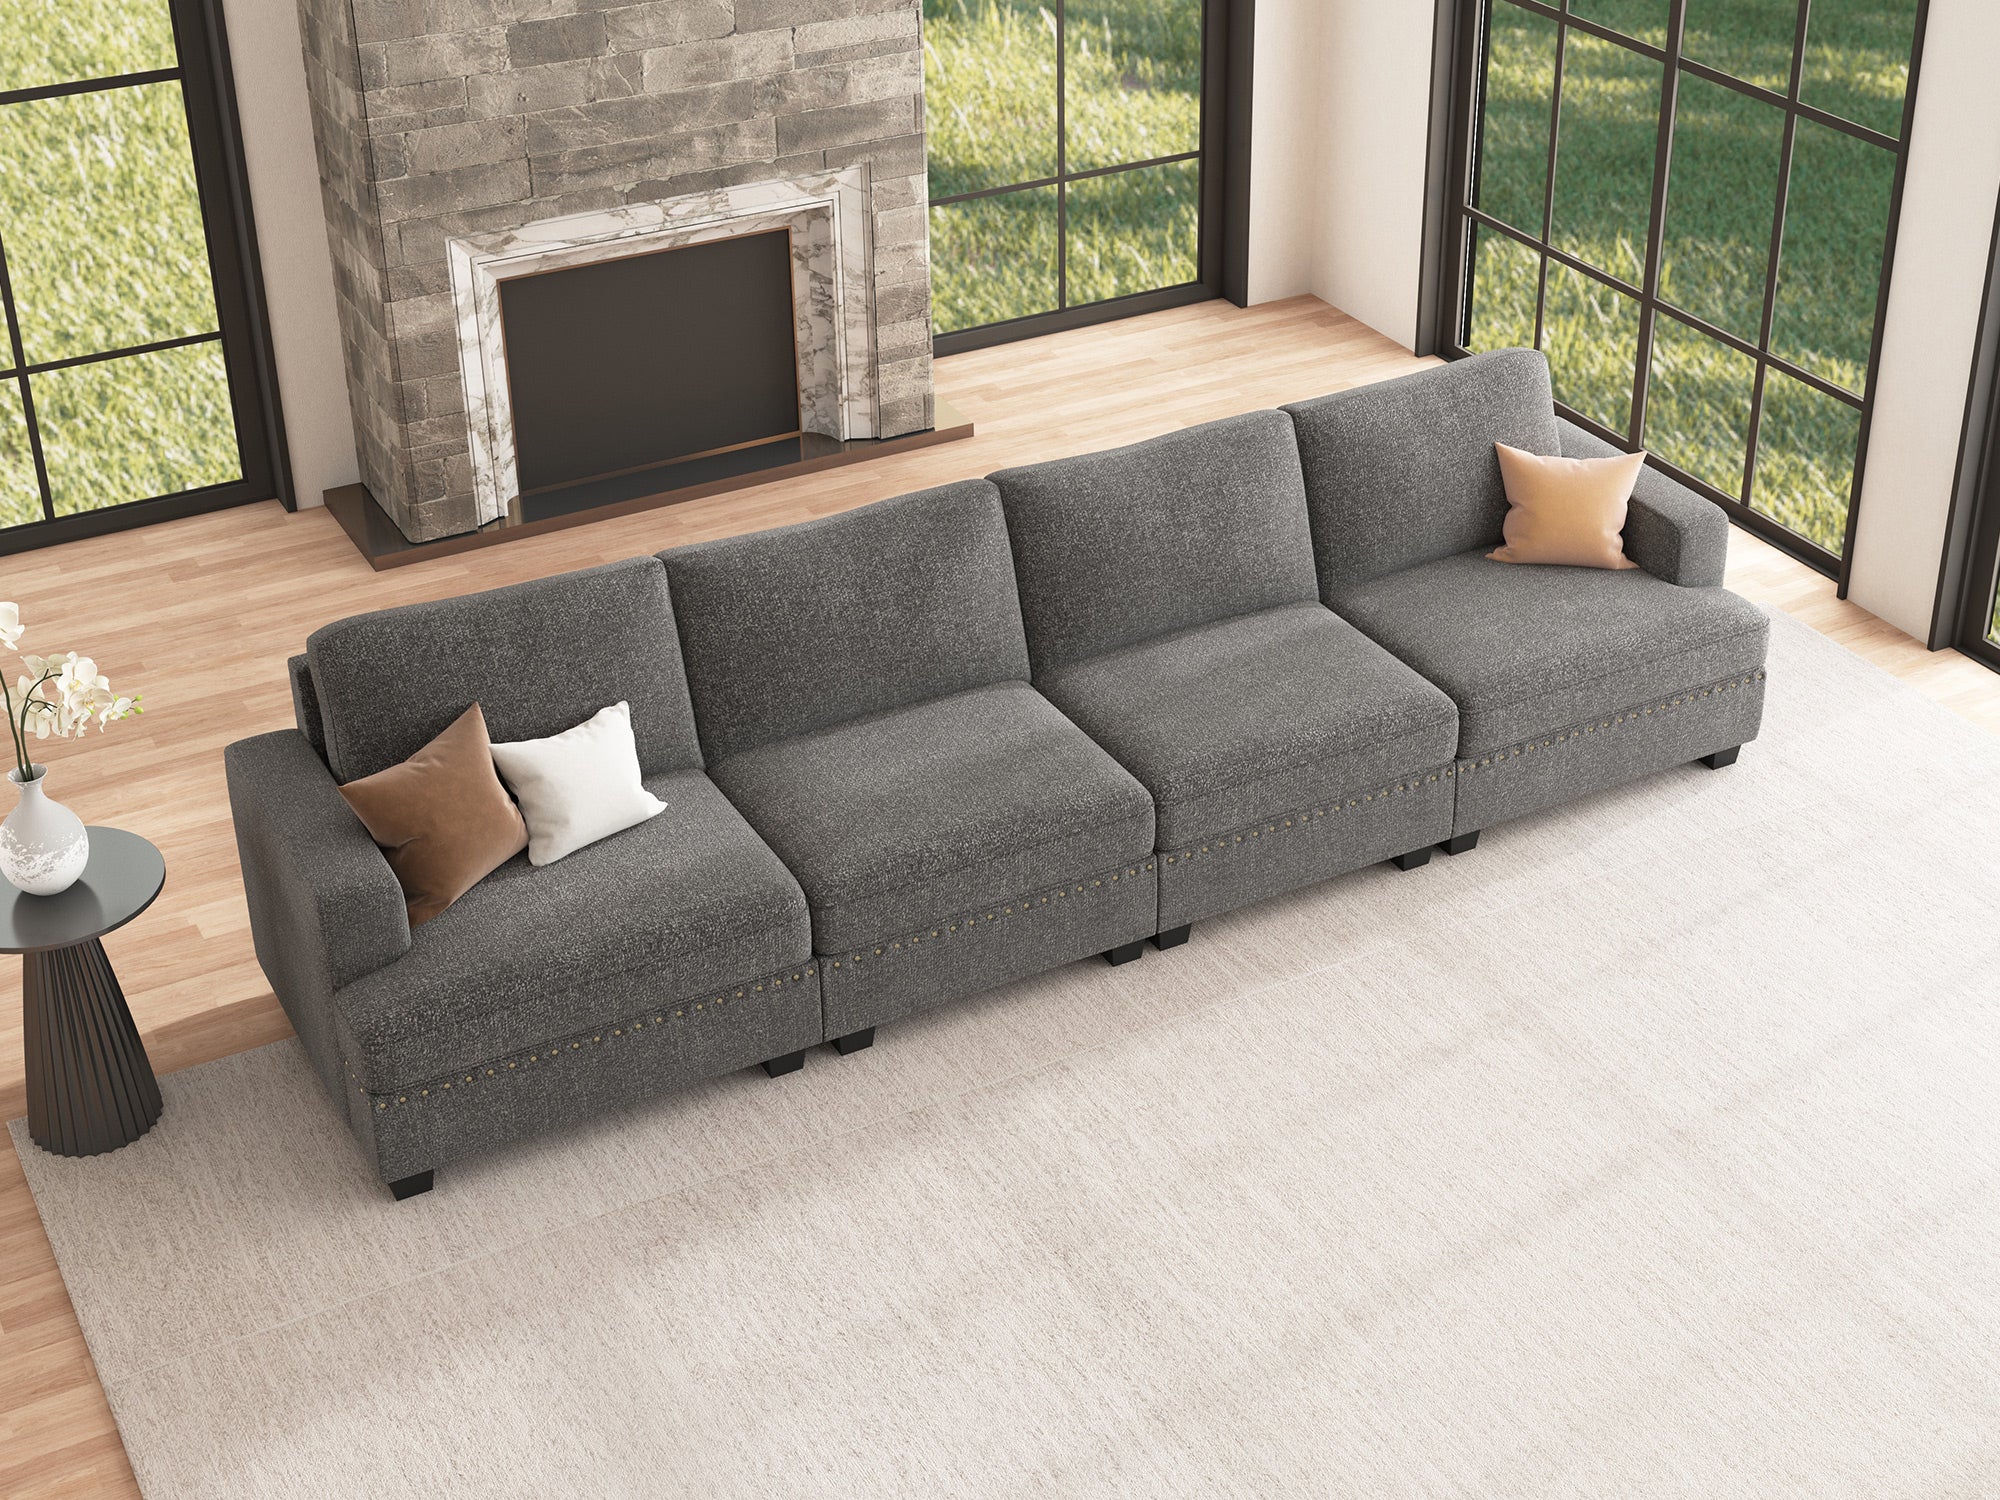 NOLANY 4-Seat Corner Modular Sofa Oversized Sectional Couch for Living Room #Color_Light Grey